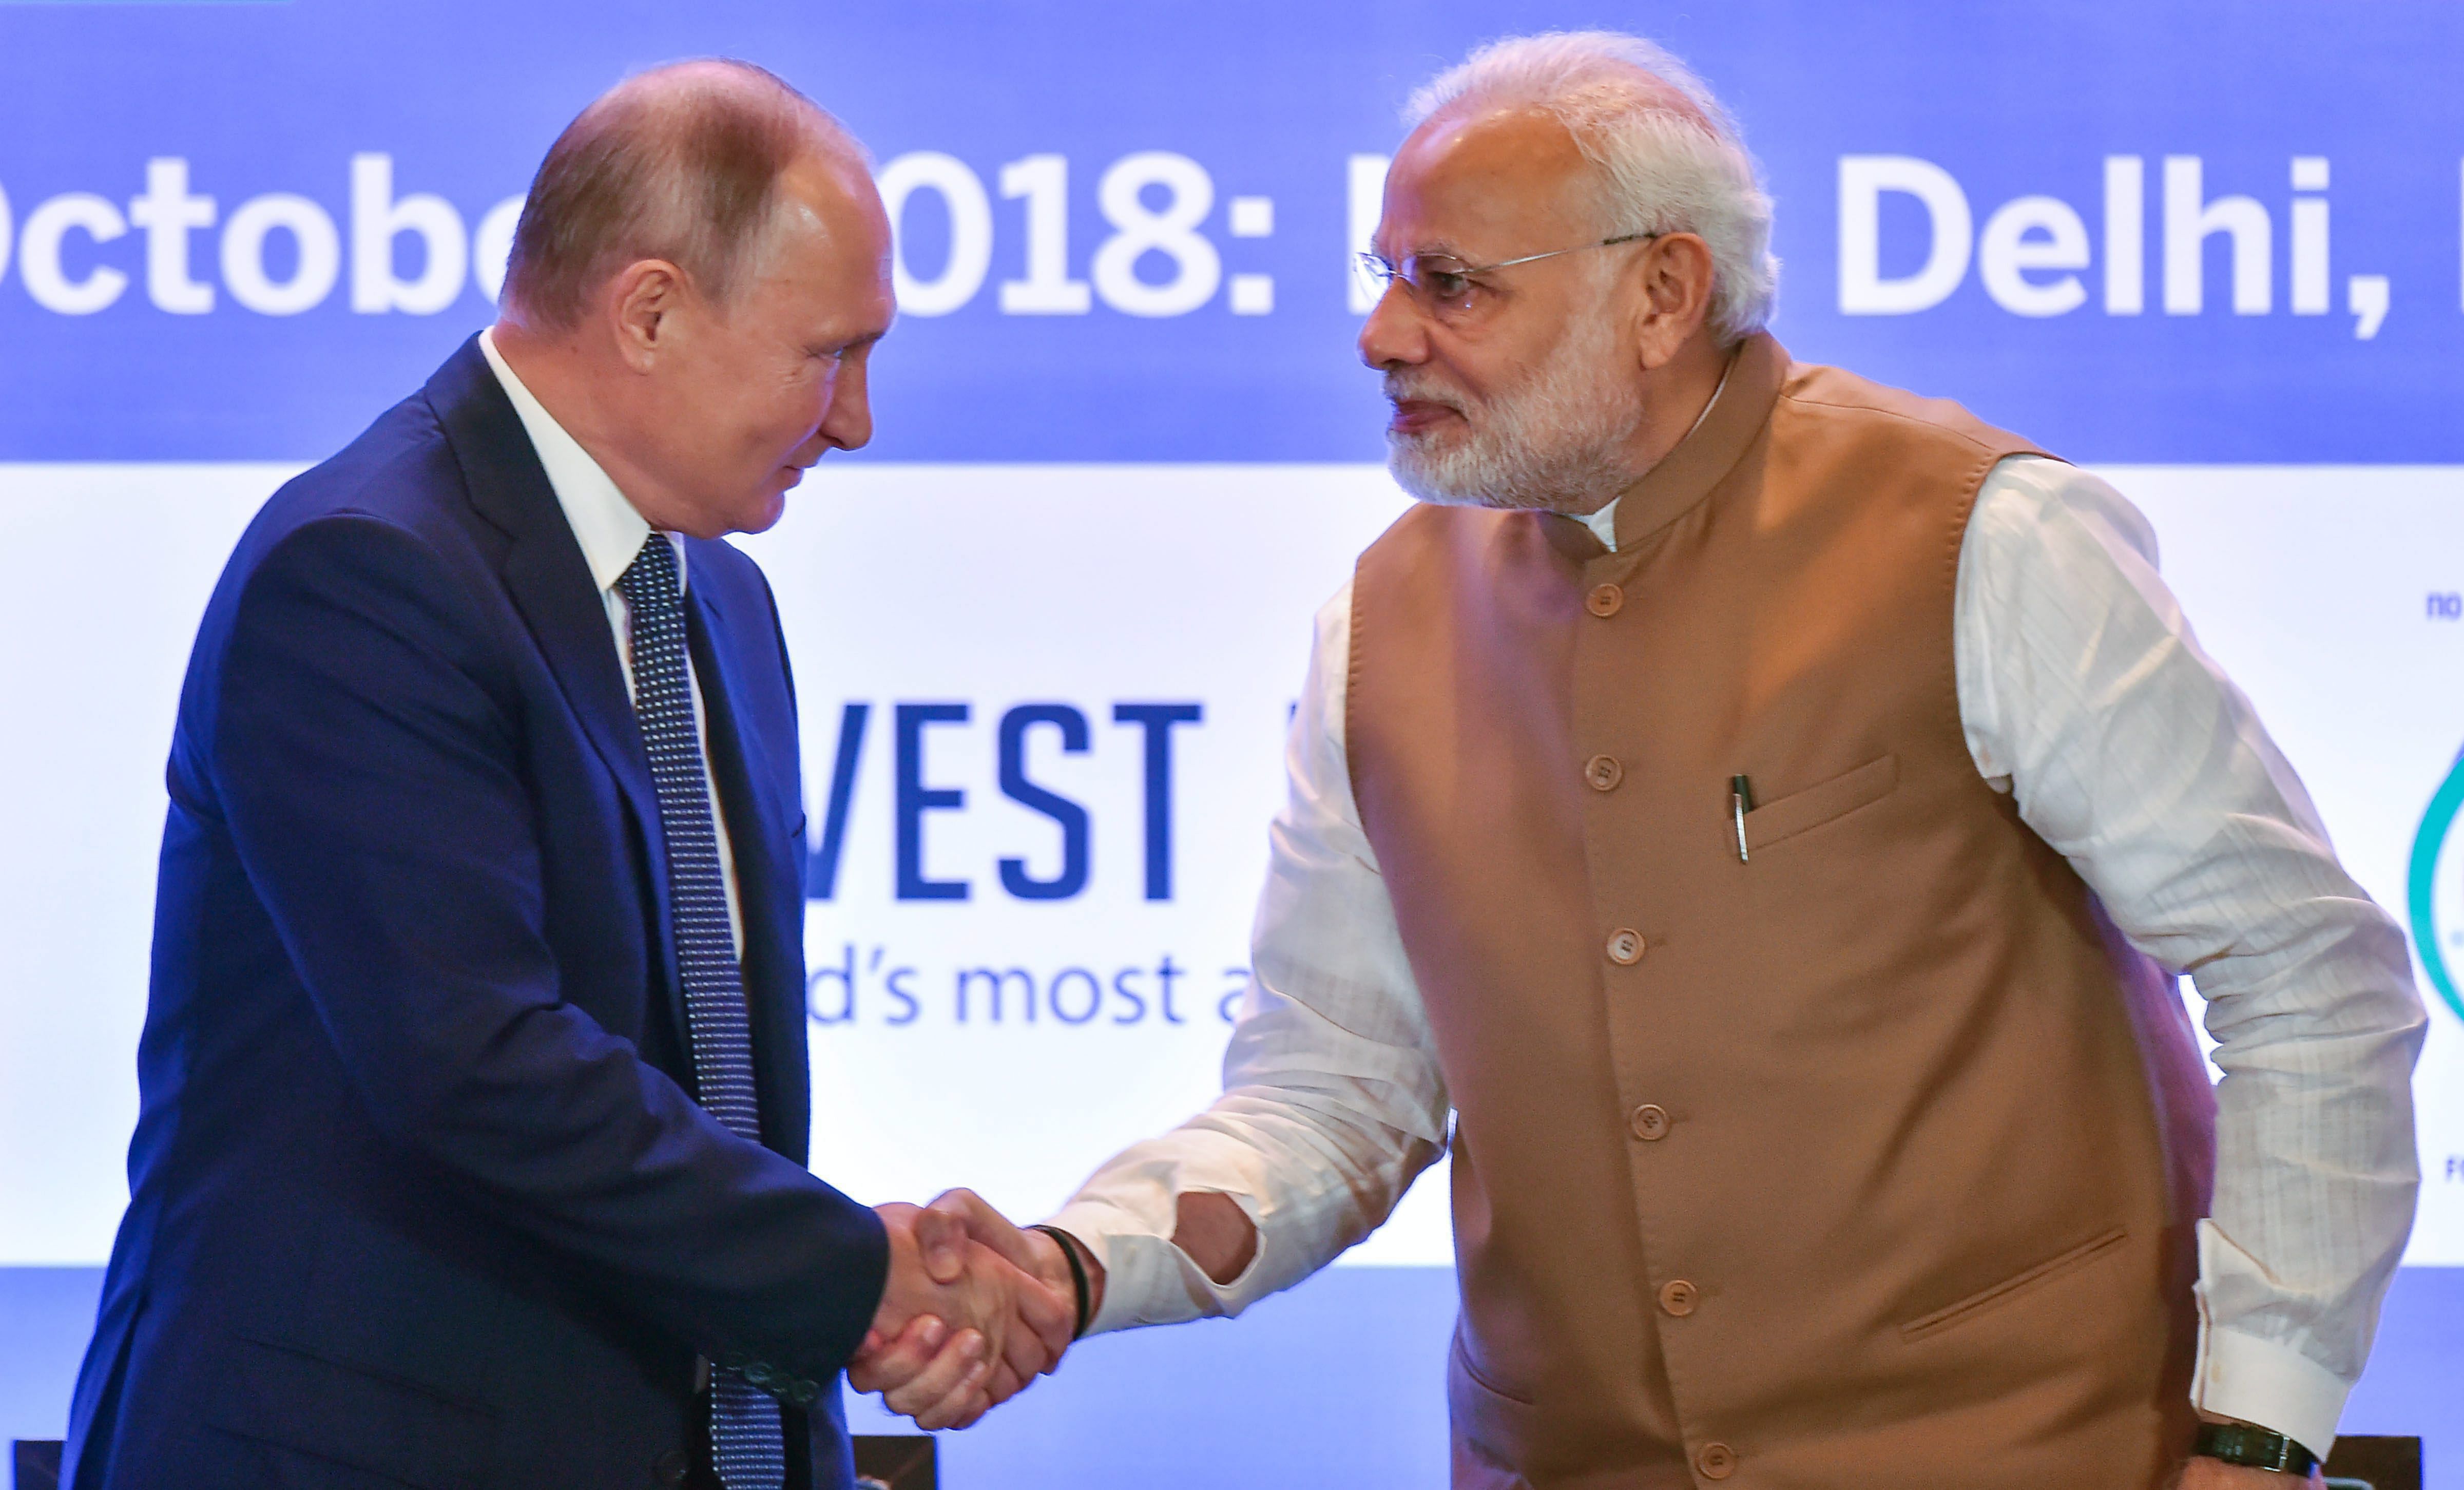 Moscow on Thursday said that its defence cooperation with New Delhi would not be detered by United States sanctions